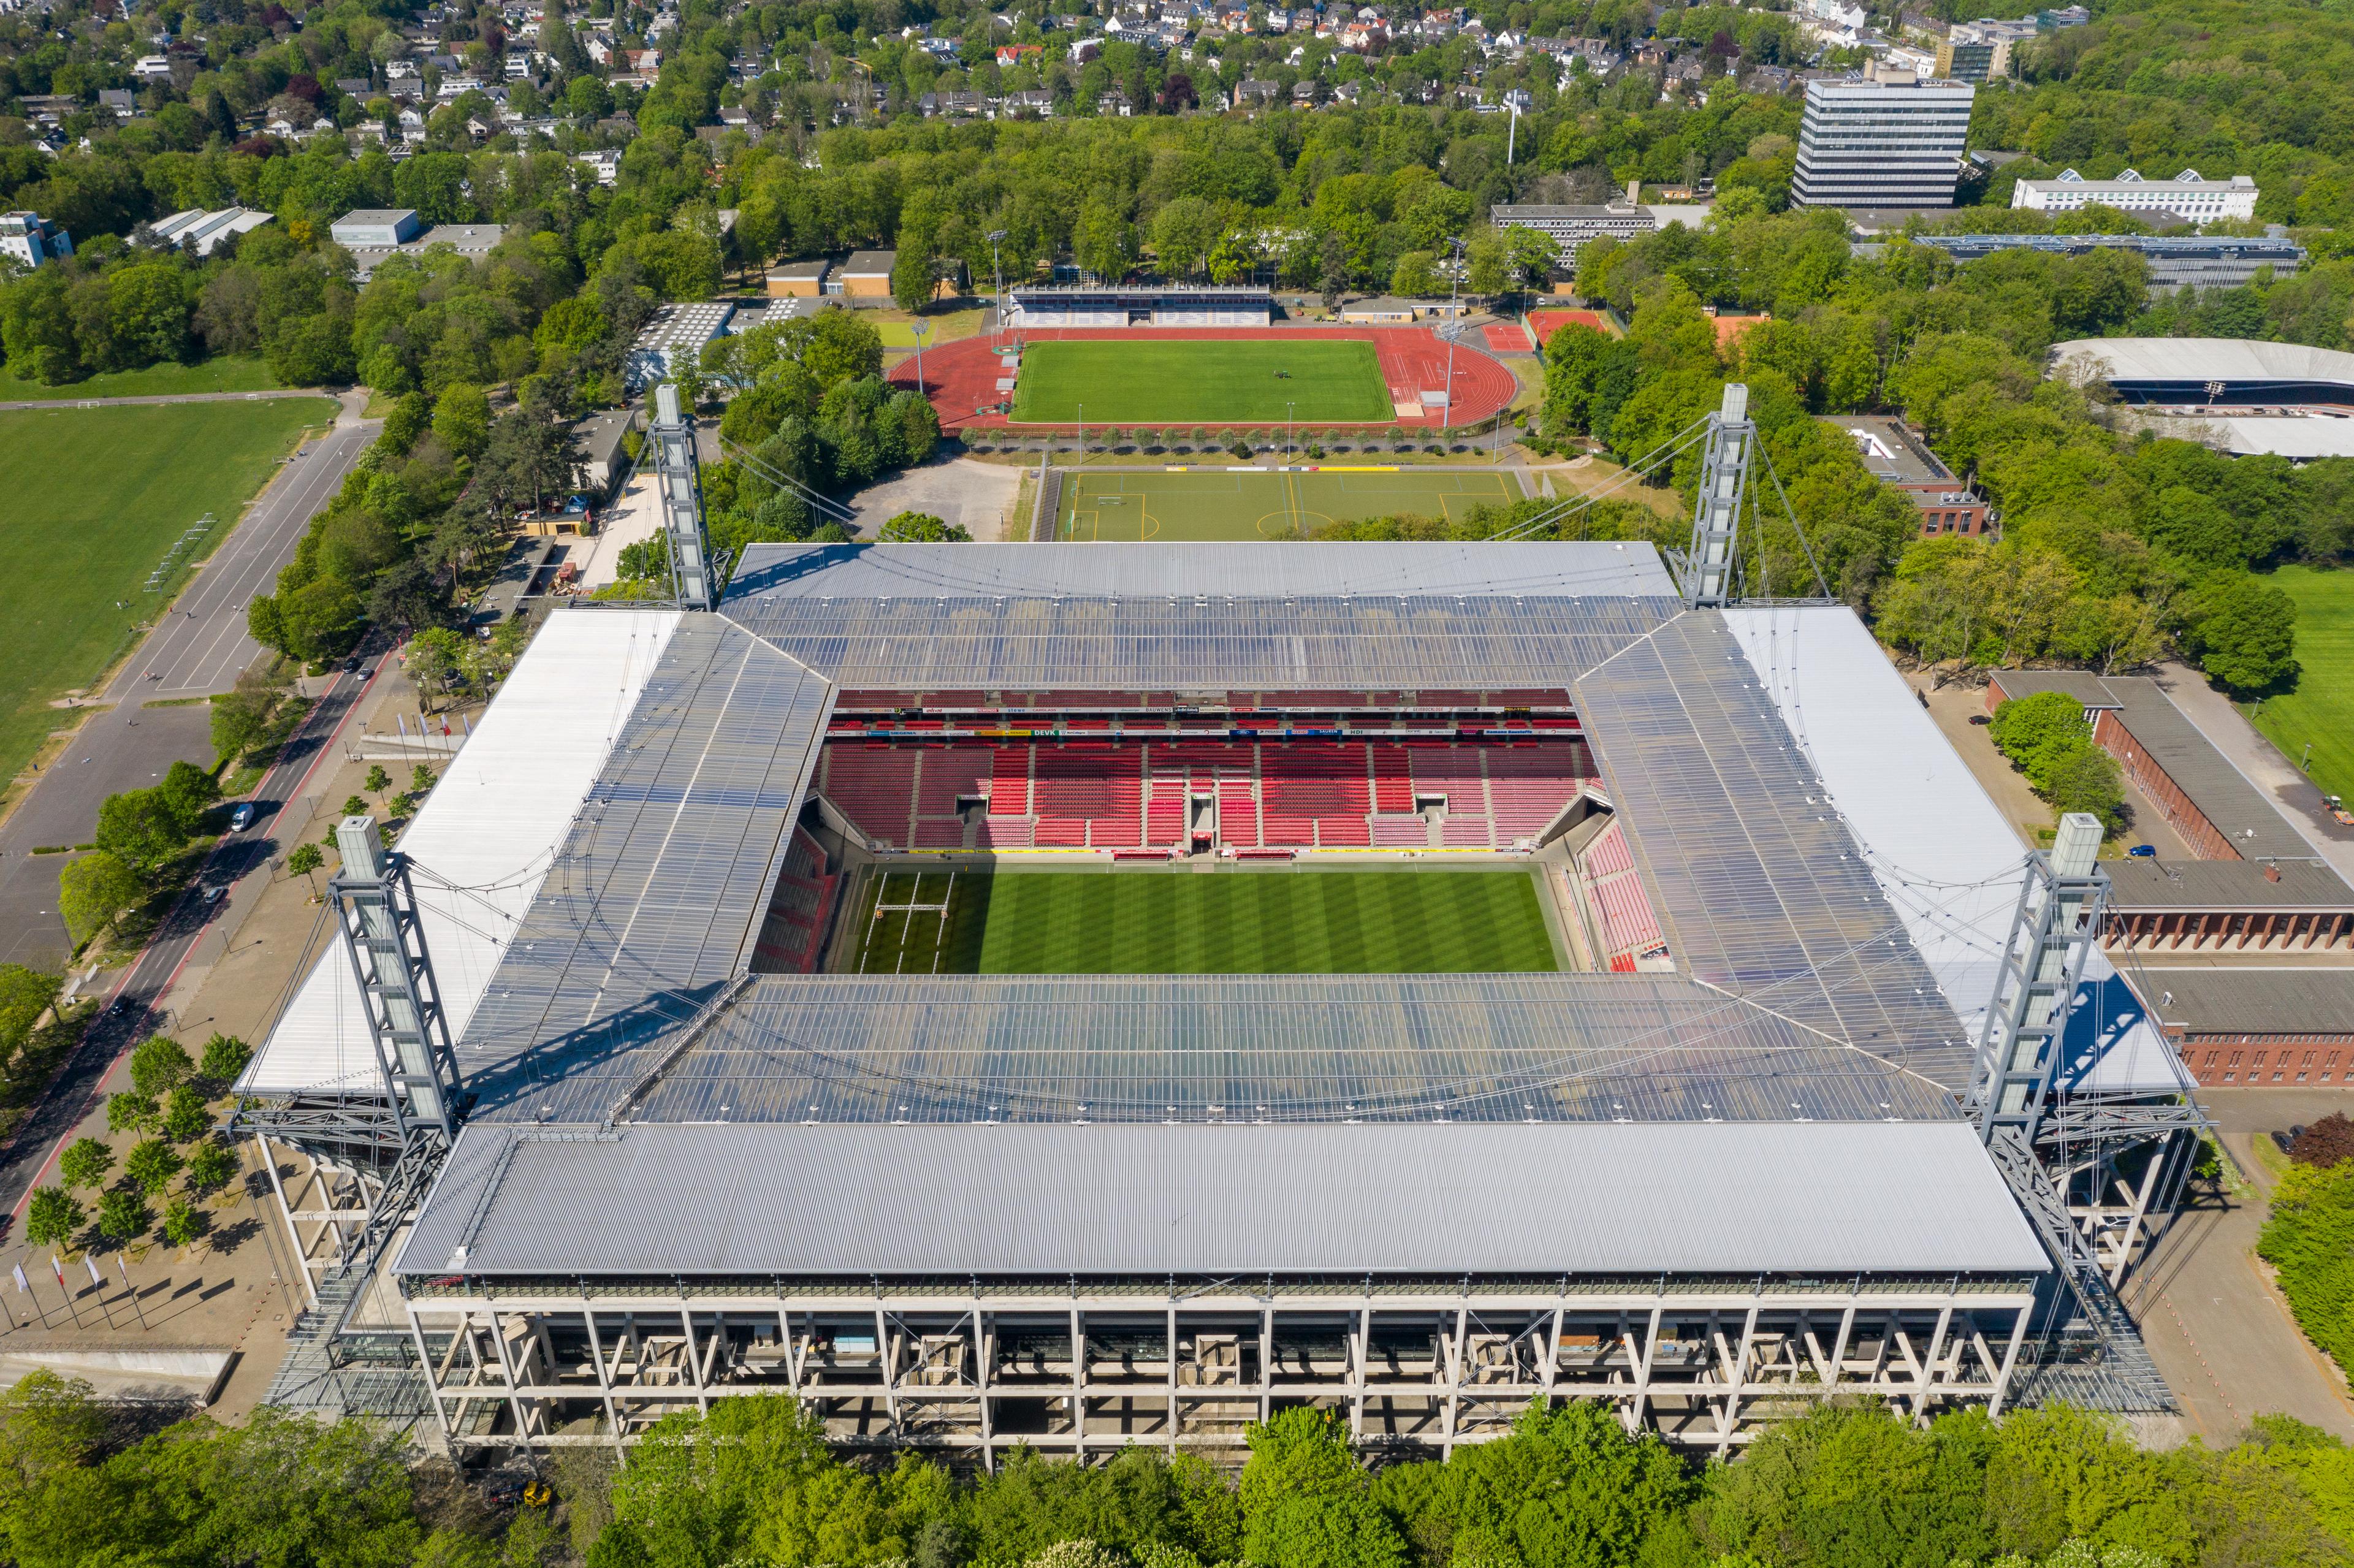 The Cologne Stadium in Müngerspark.